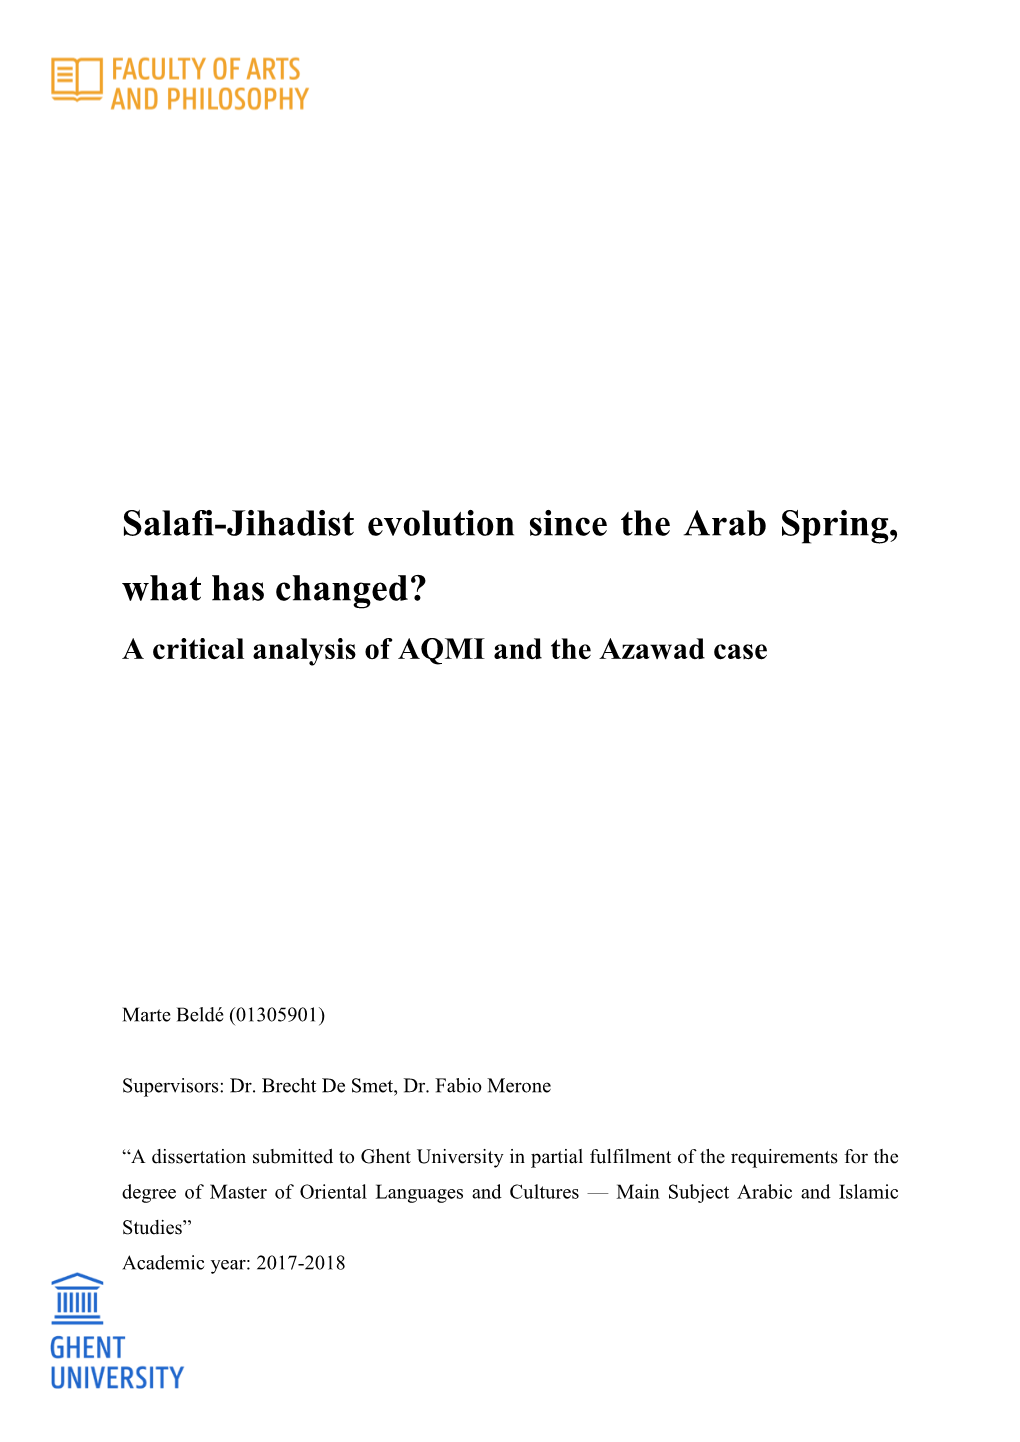 Salafi-Jihadist Evolution Since the Arab Spring, What Has Changed? a Critical Analysis of AQMI and the Azawad Case